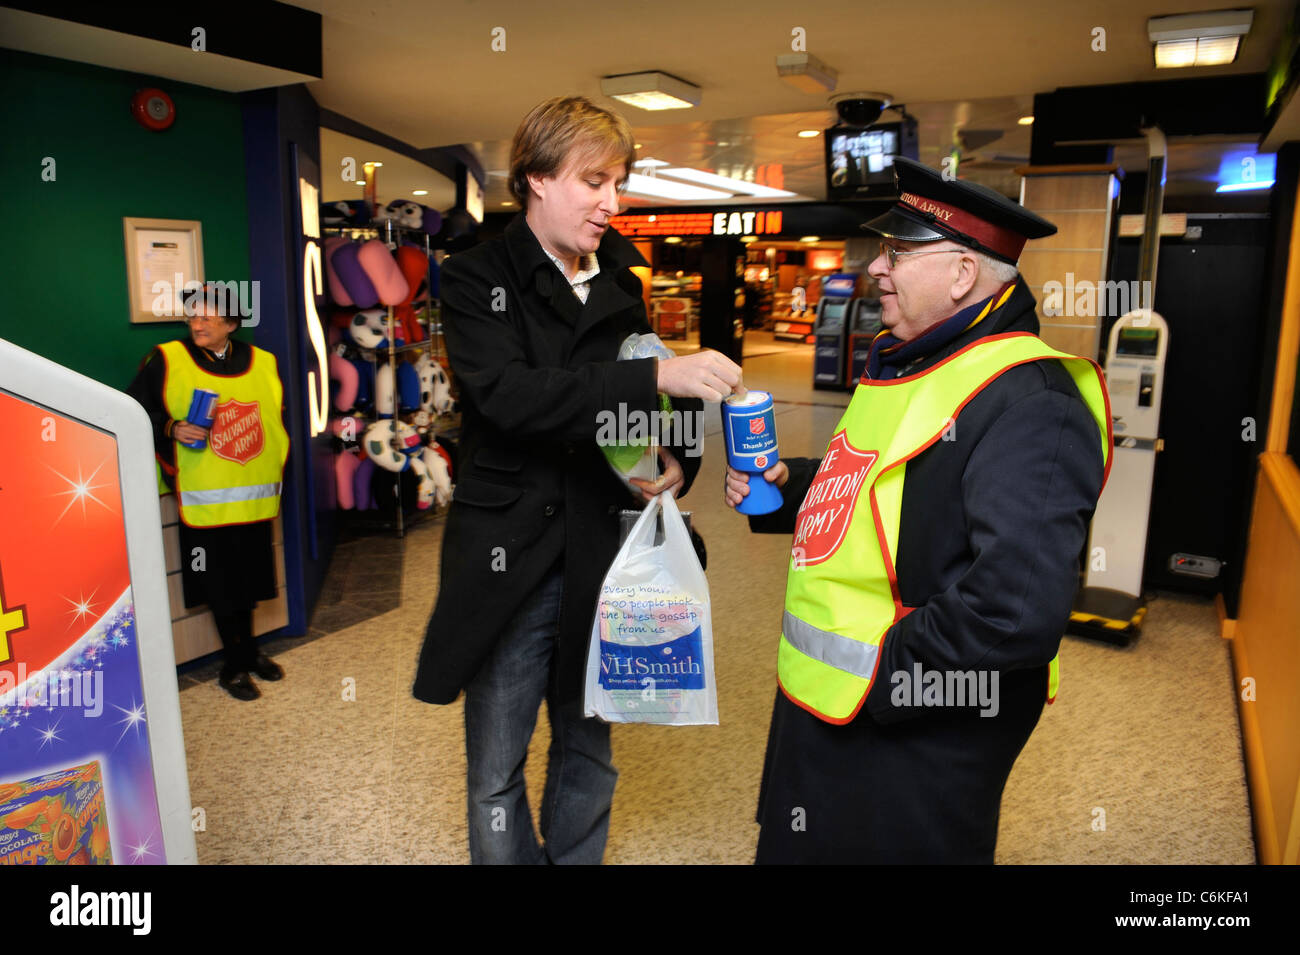 The Salvation Army collecting at a motorway service station Dec 2008 UK Stock Photo